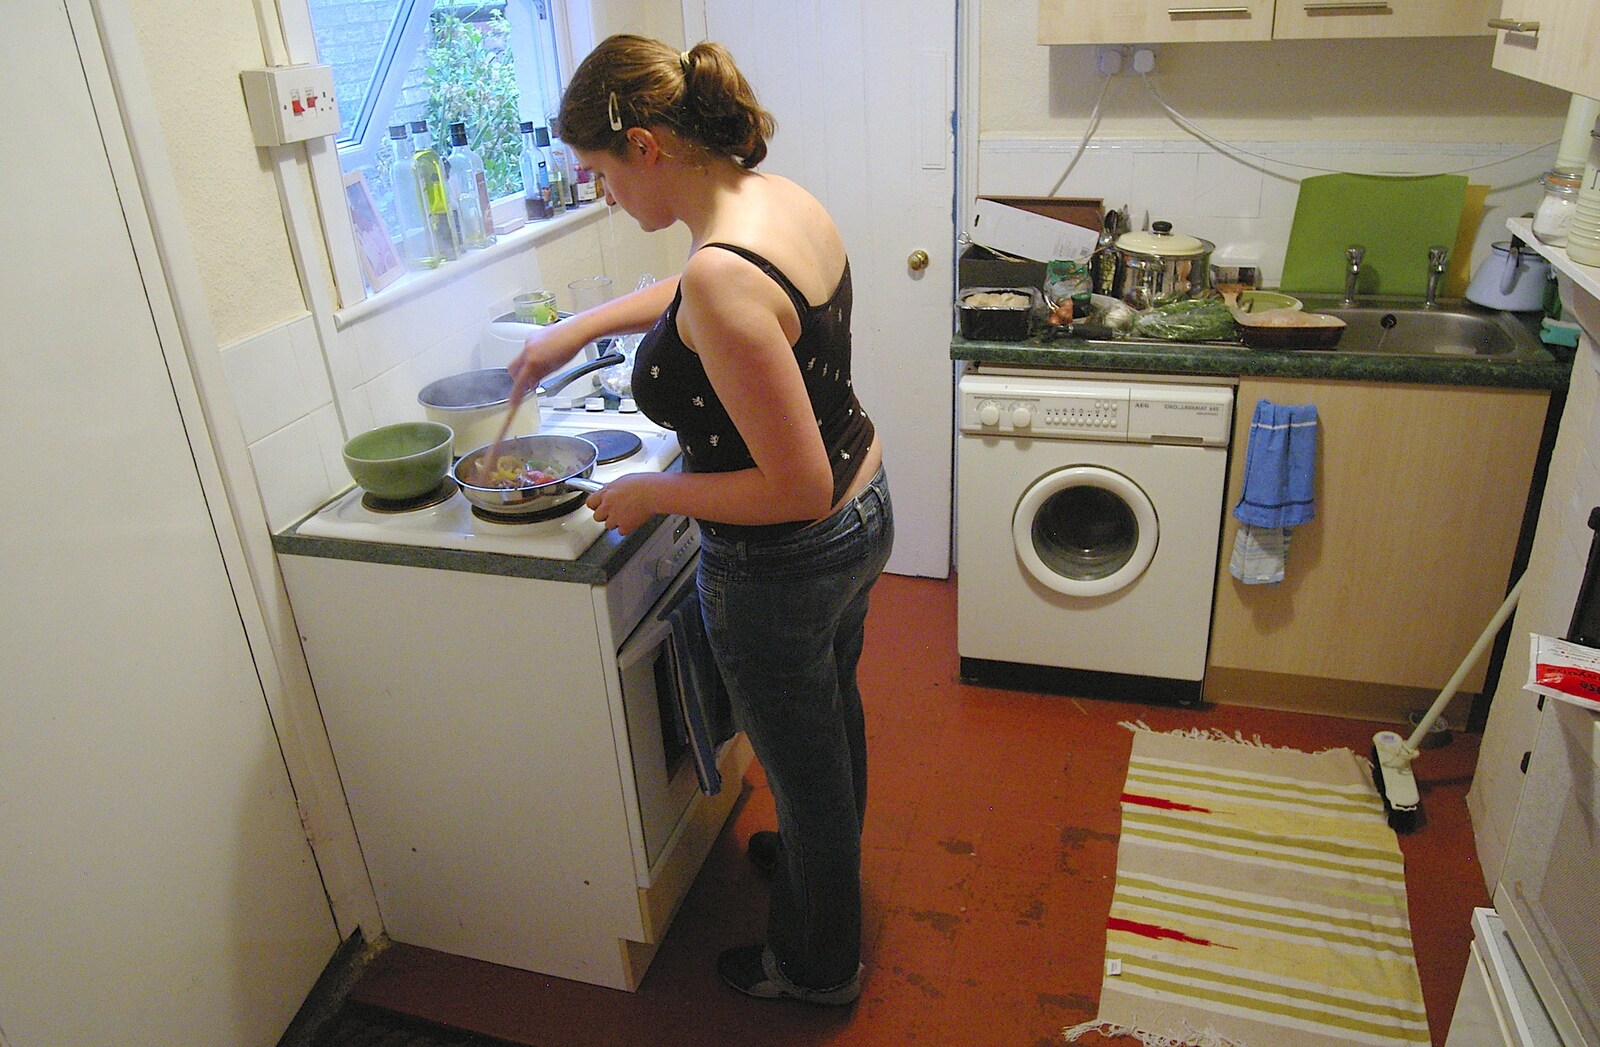 Isobel rustles up a stir-fry from Shakespeare at St. John's, Parker's Piece and the A14's Worst Day - 17th July 2006